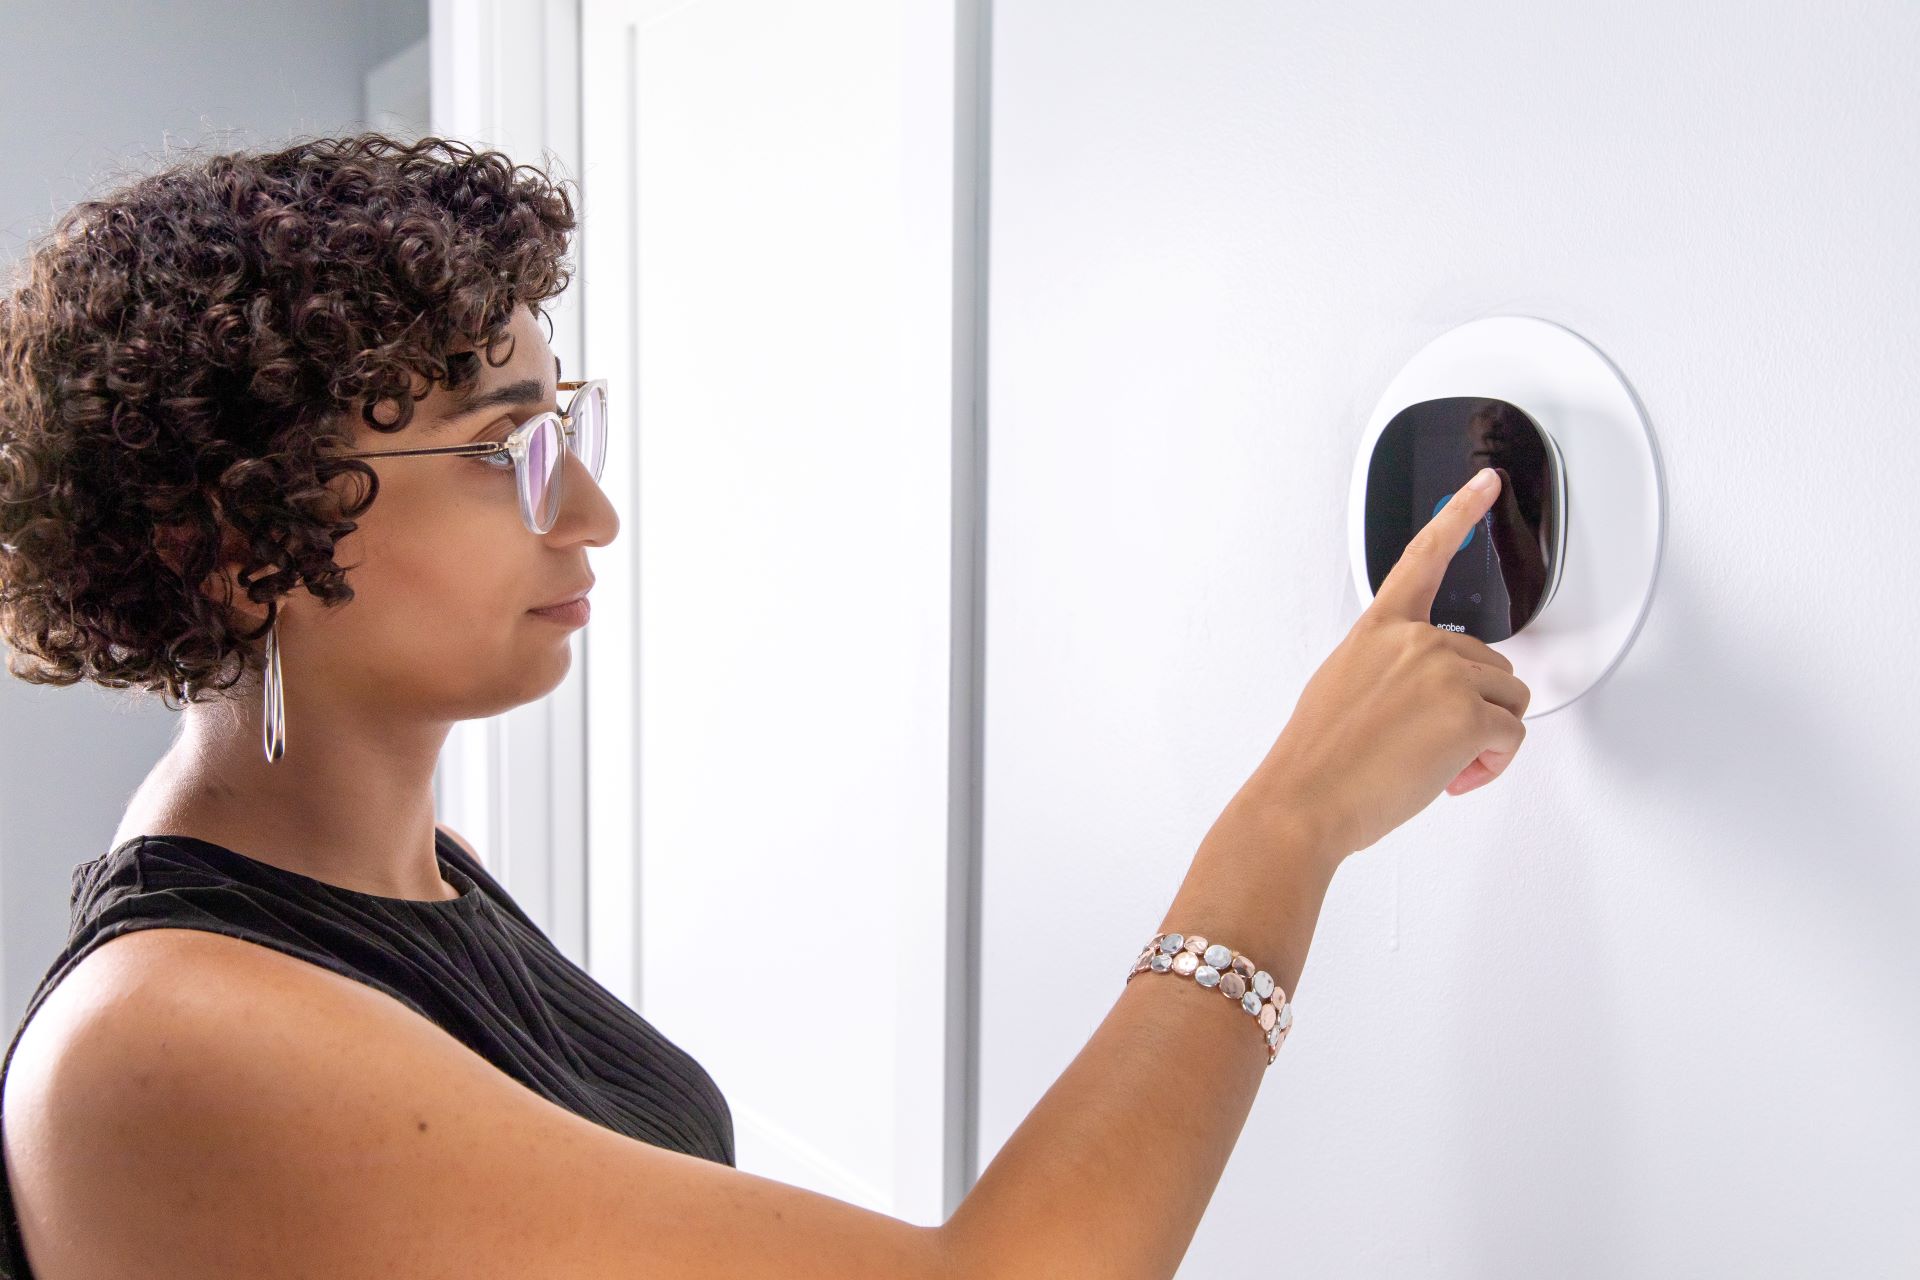 A woman adjusting a thermostat in the hallway